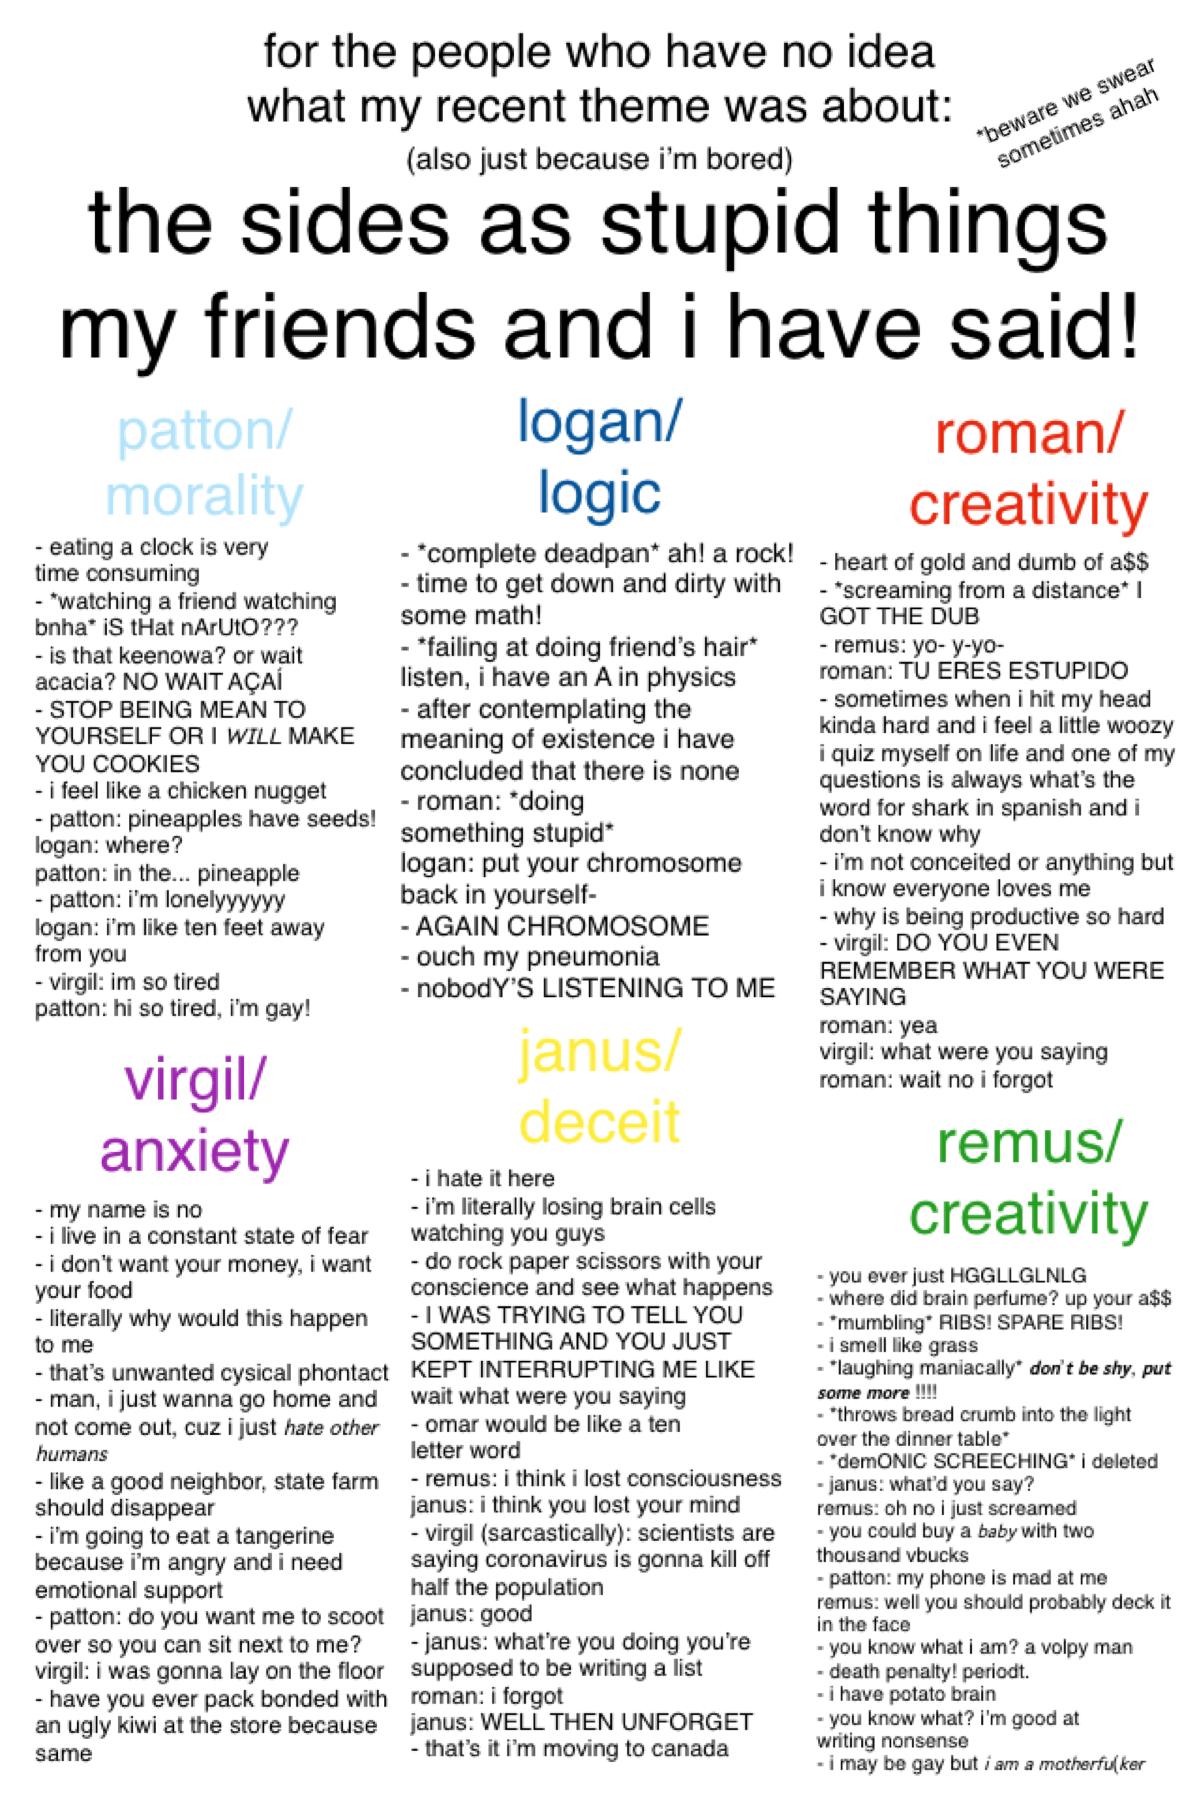 tag yourself i’m virgil and janus HAHA
anyways i made this cuz i got bored but also cuz i wanted to sort of explain who the sides were since my recent theme was based on them:) comments!